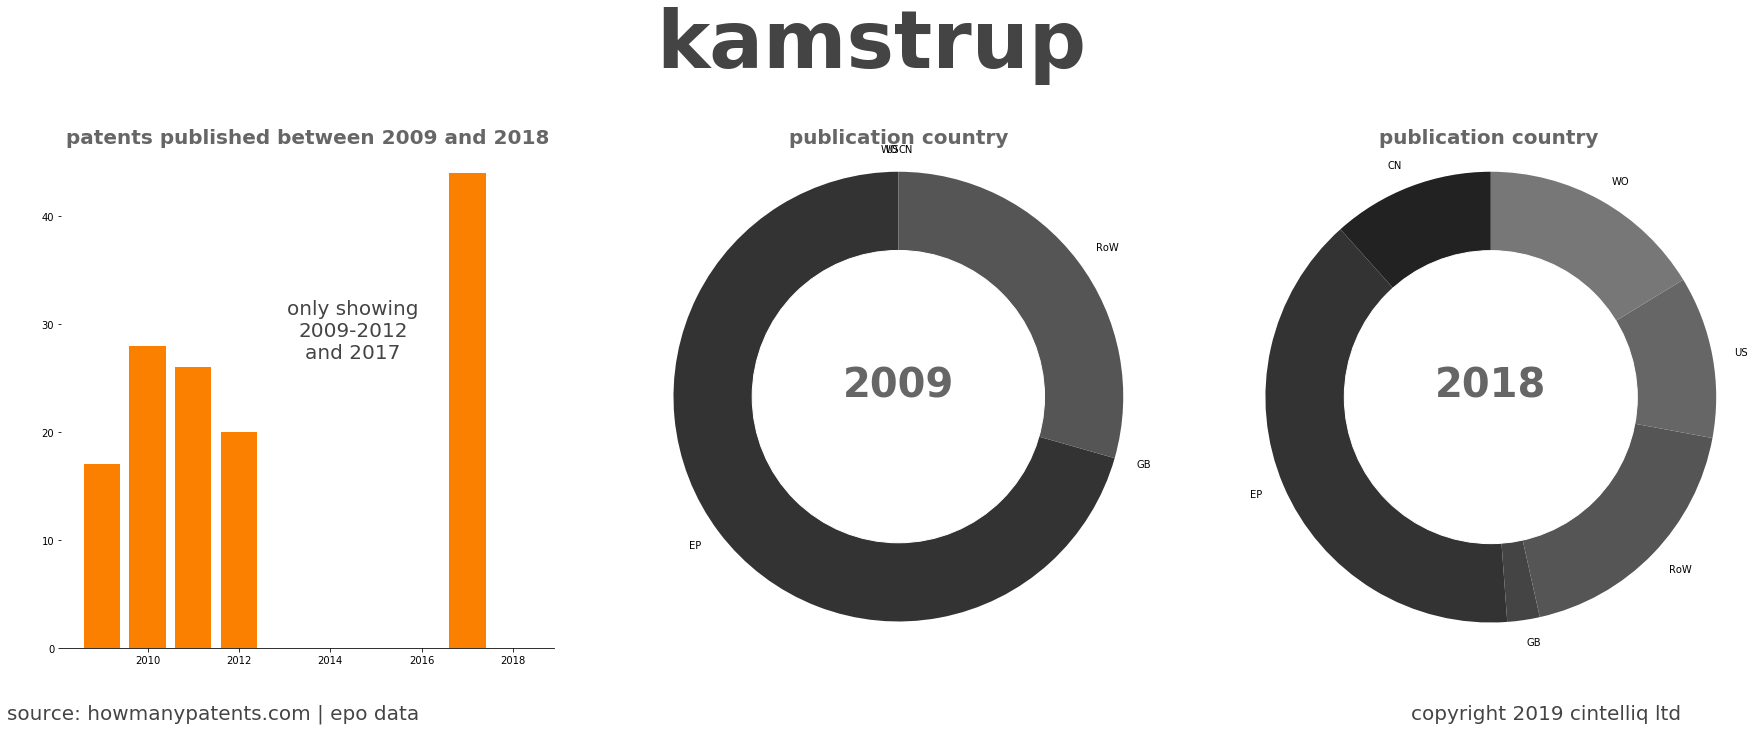 summary of patents for Kamstrup